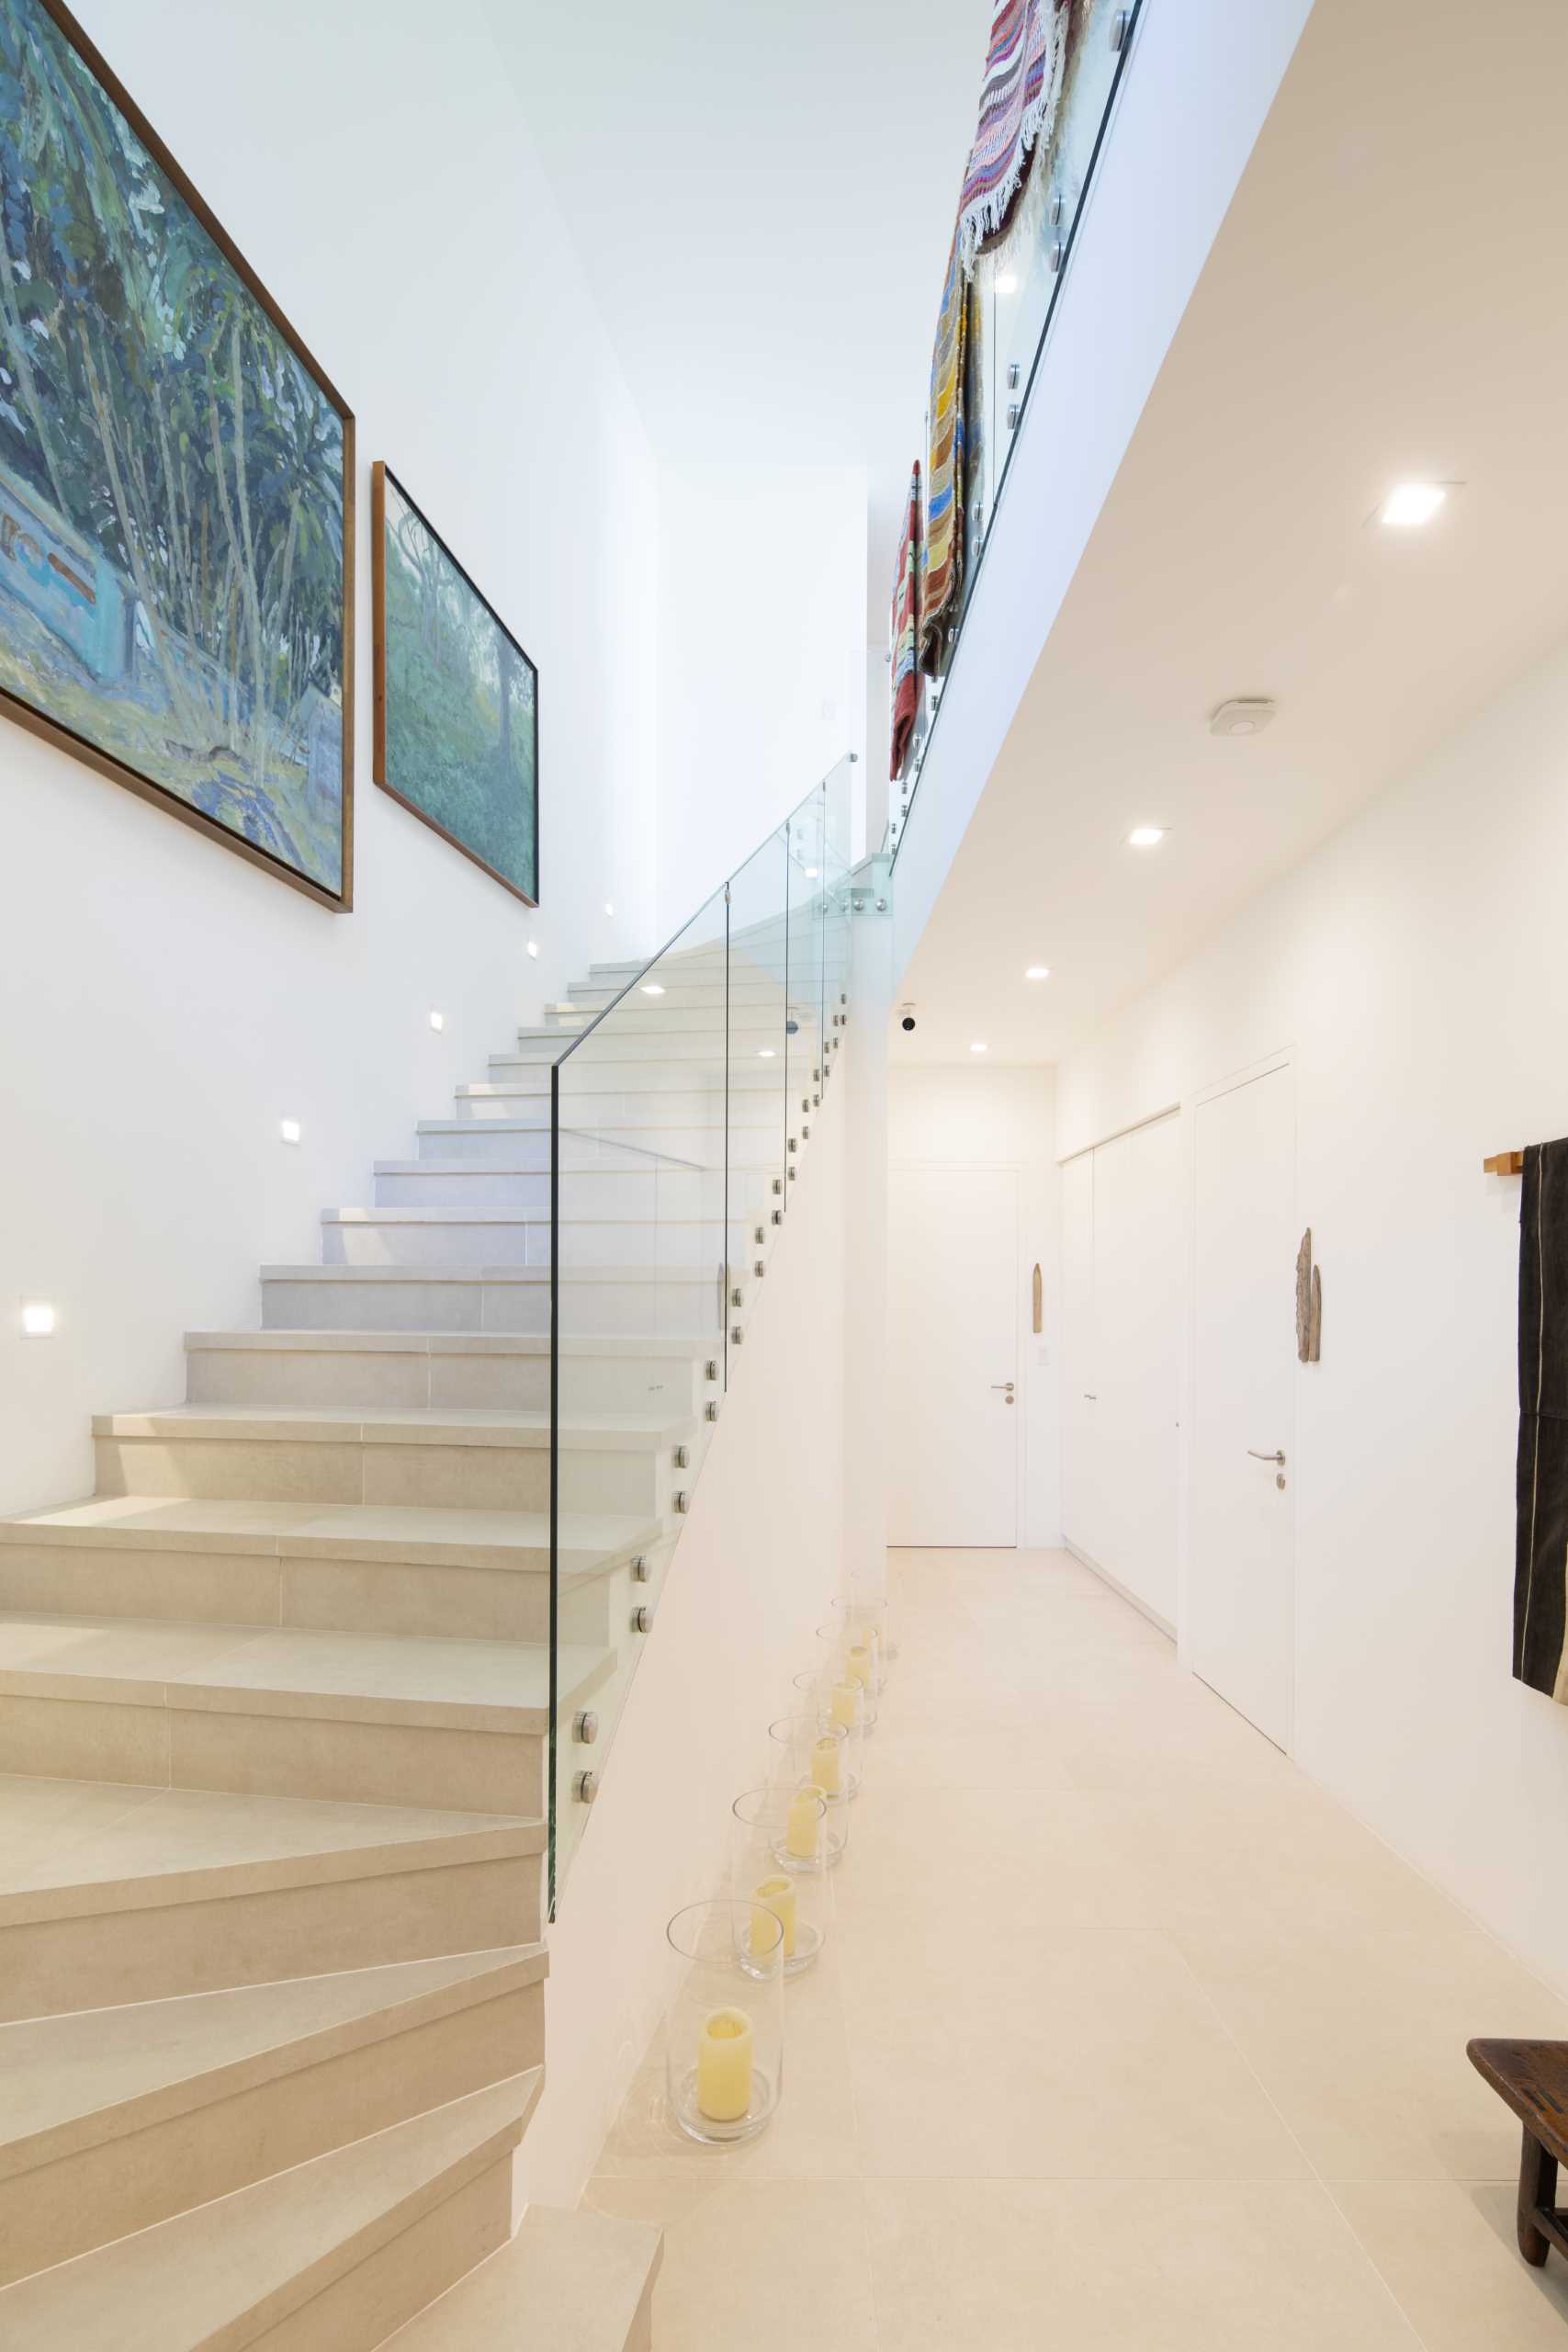 Stairs with a glass railing are decorated with artwork and rugs.